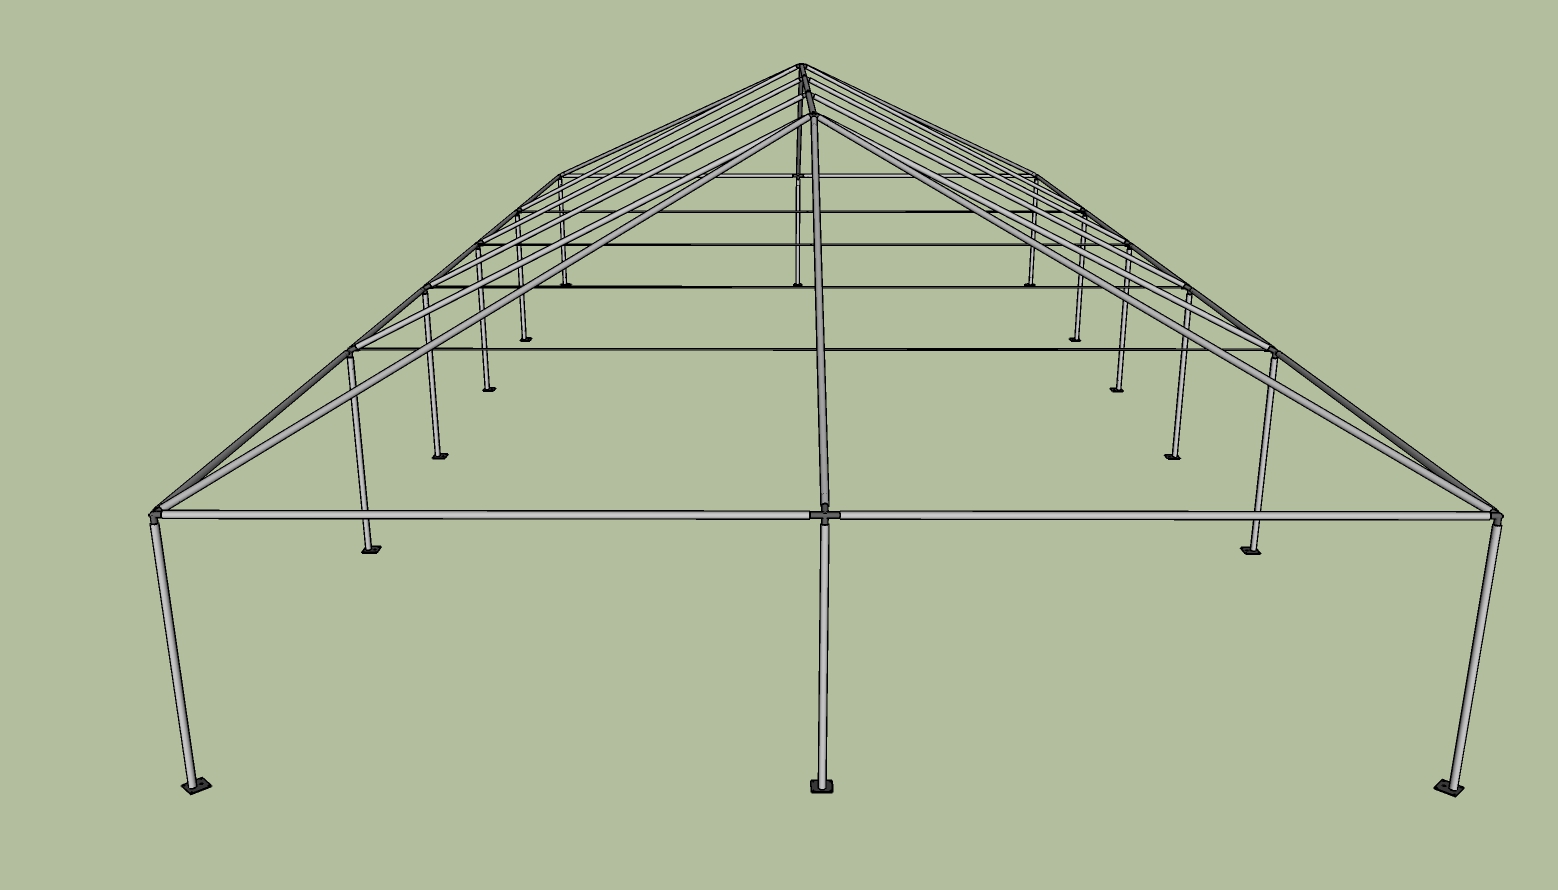 30x60 frame tent side view